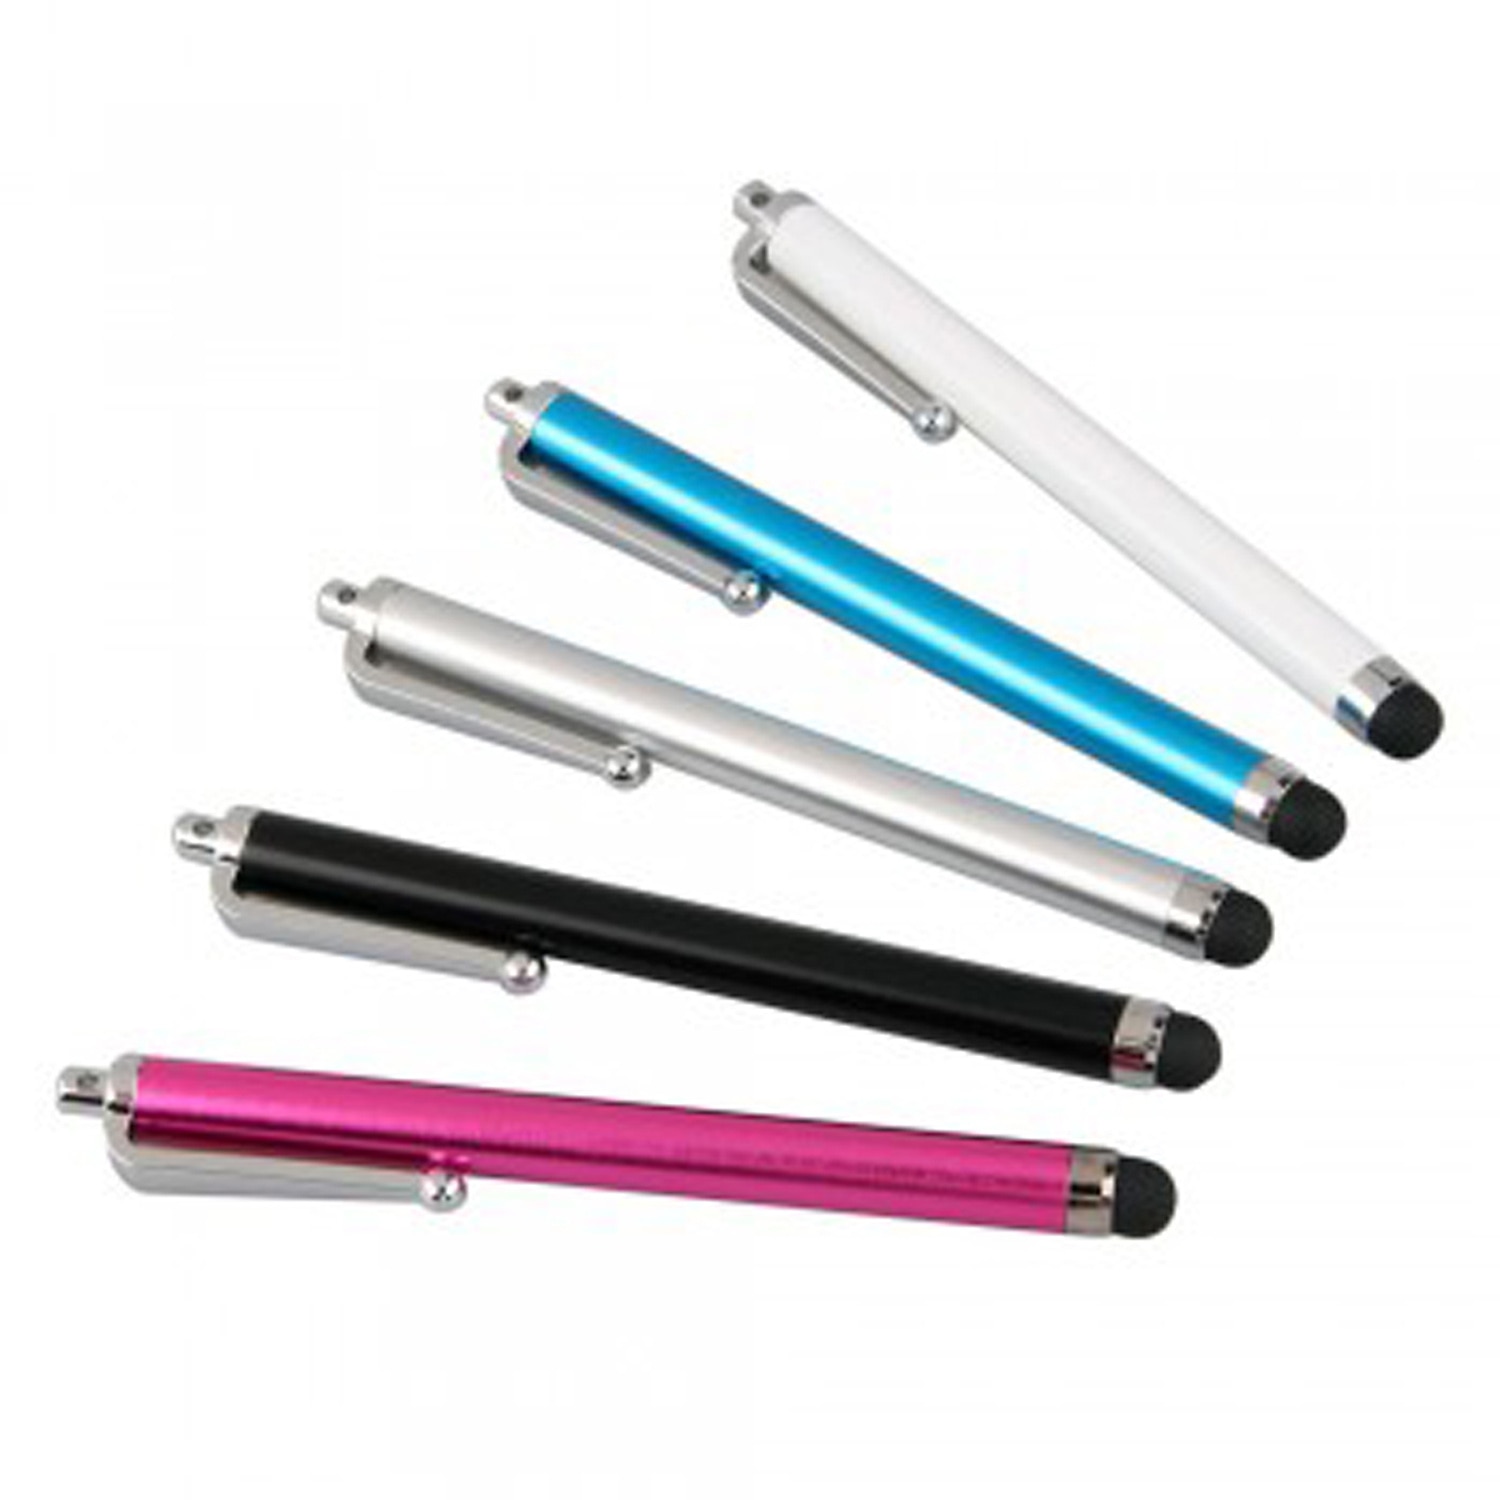 5Pcs Universal Capacitive Touch Screen Stylus Pen For All Pad Phone PC Tablet HK